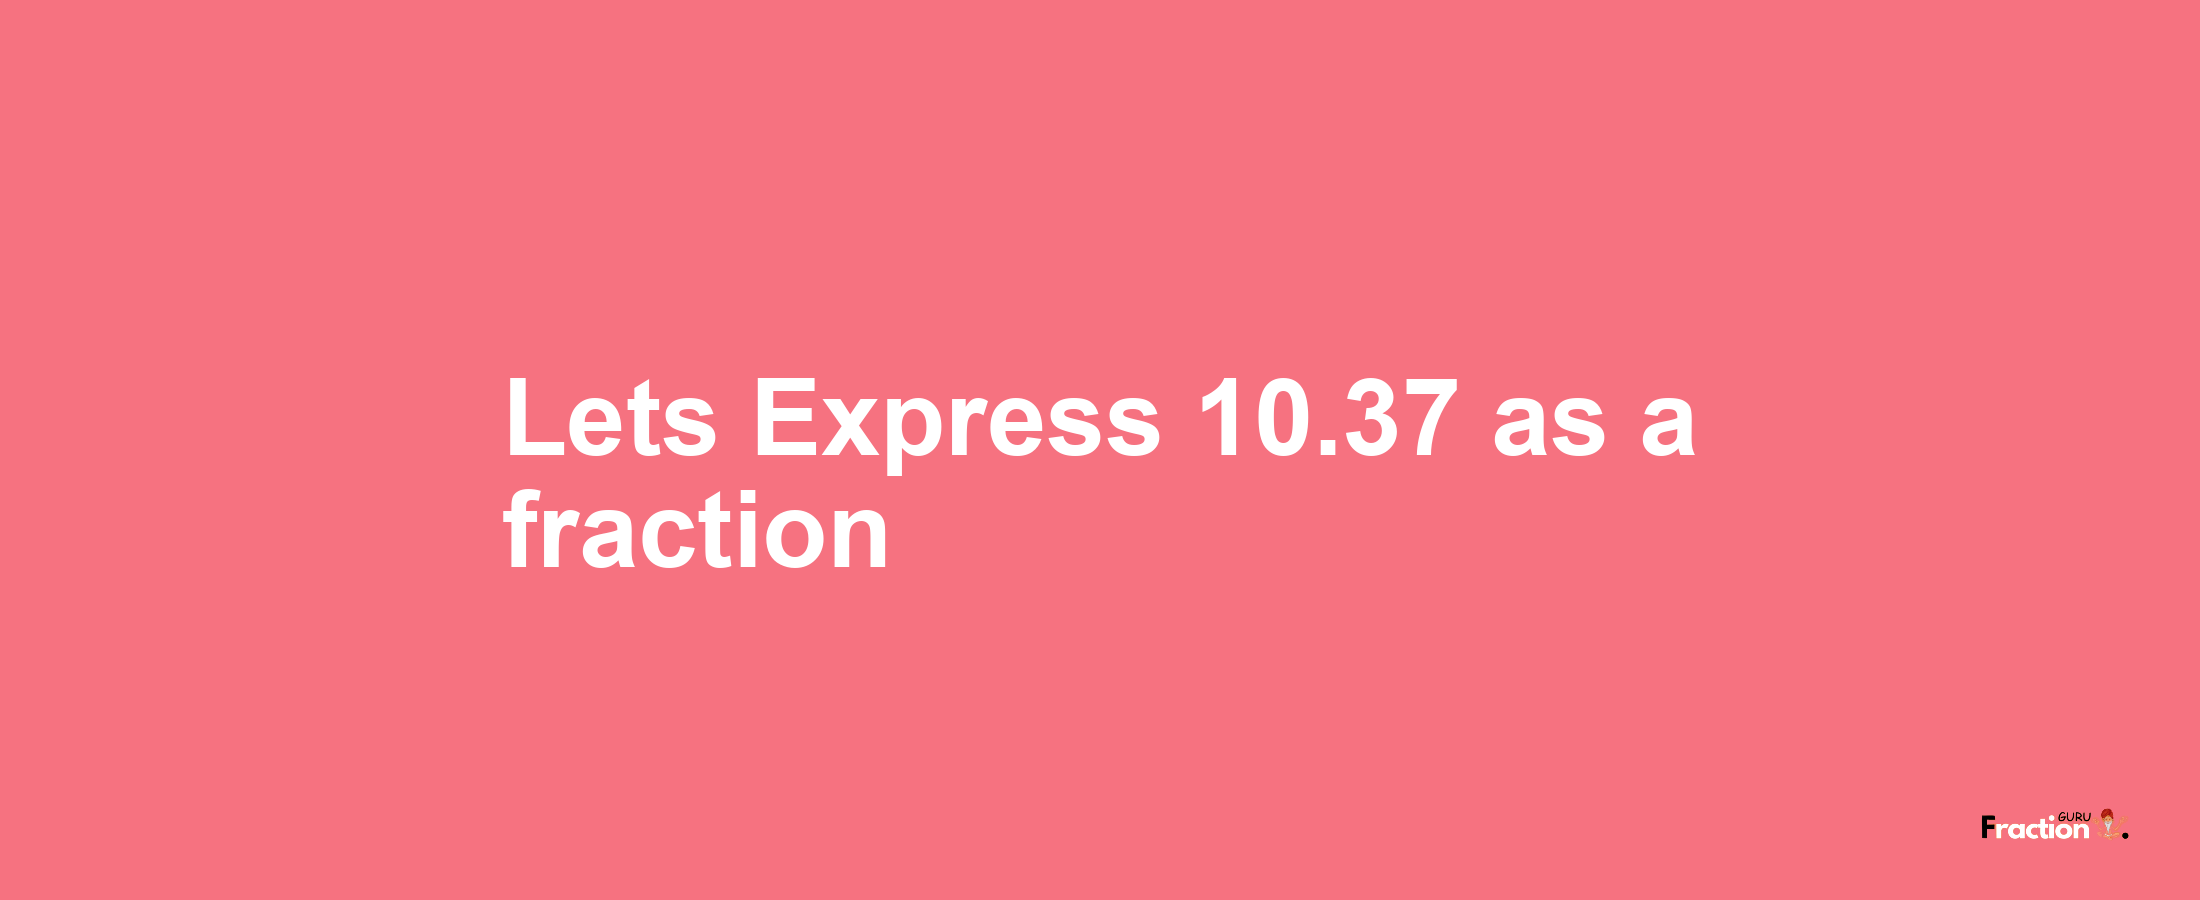 Lets Express 10.37 as afraction